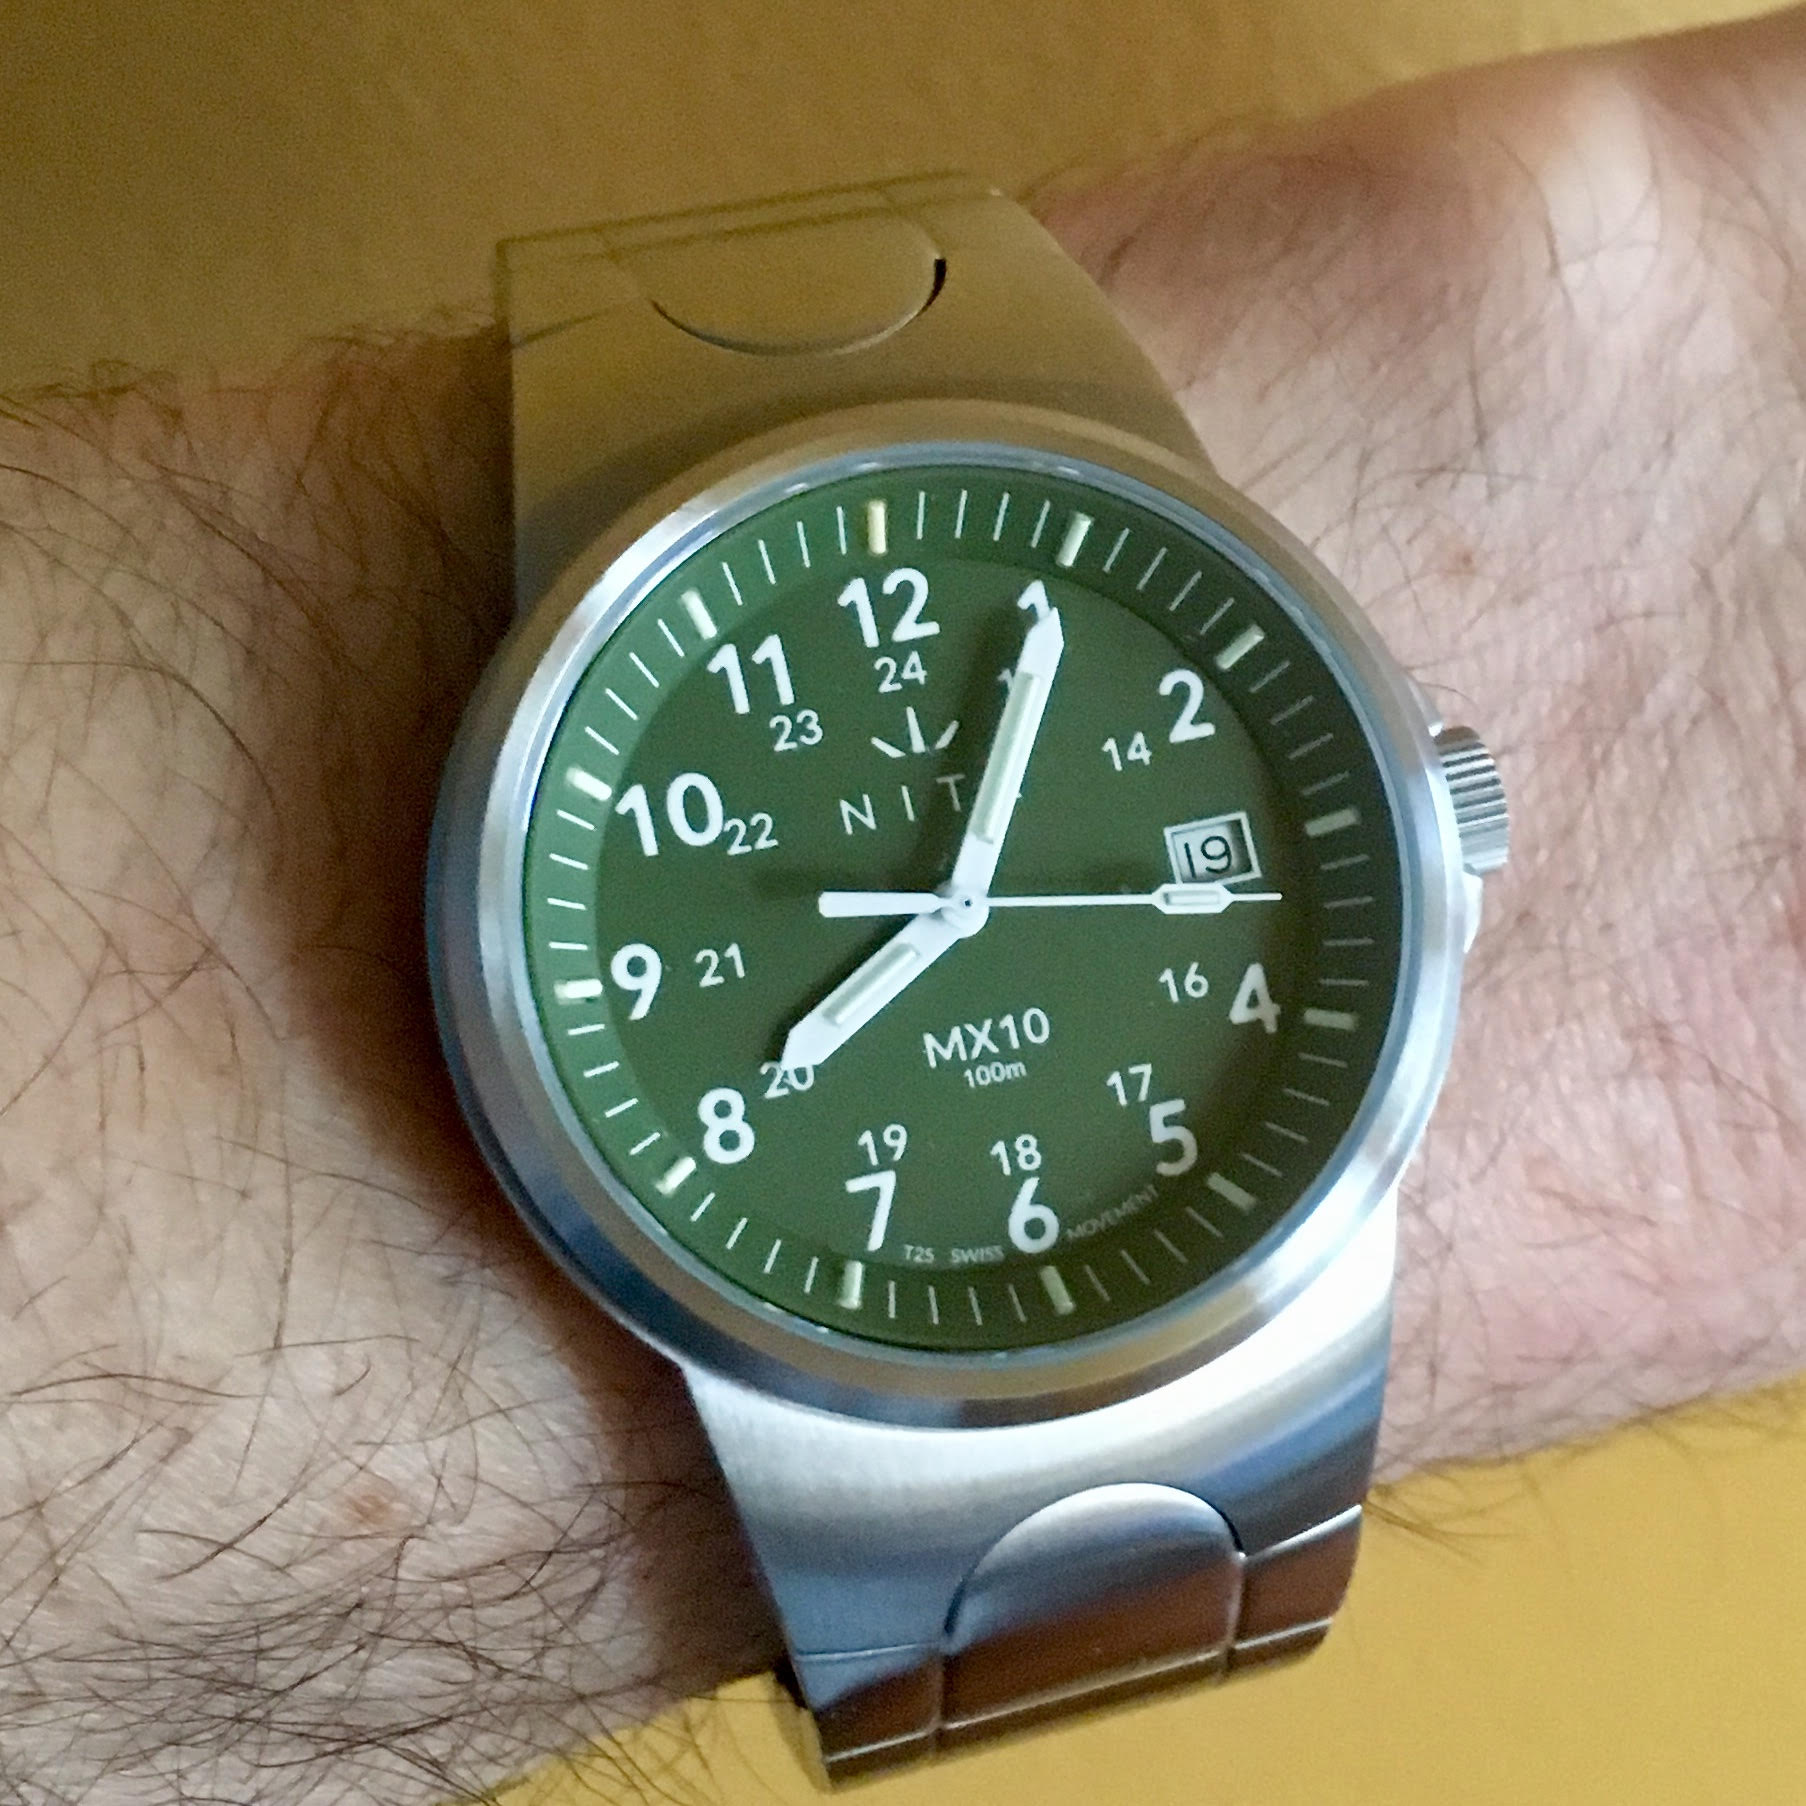 Owner Review: Nite Watches MX10 – A Modern Field Watch